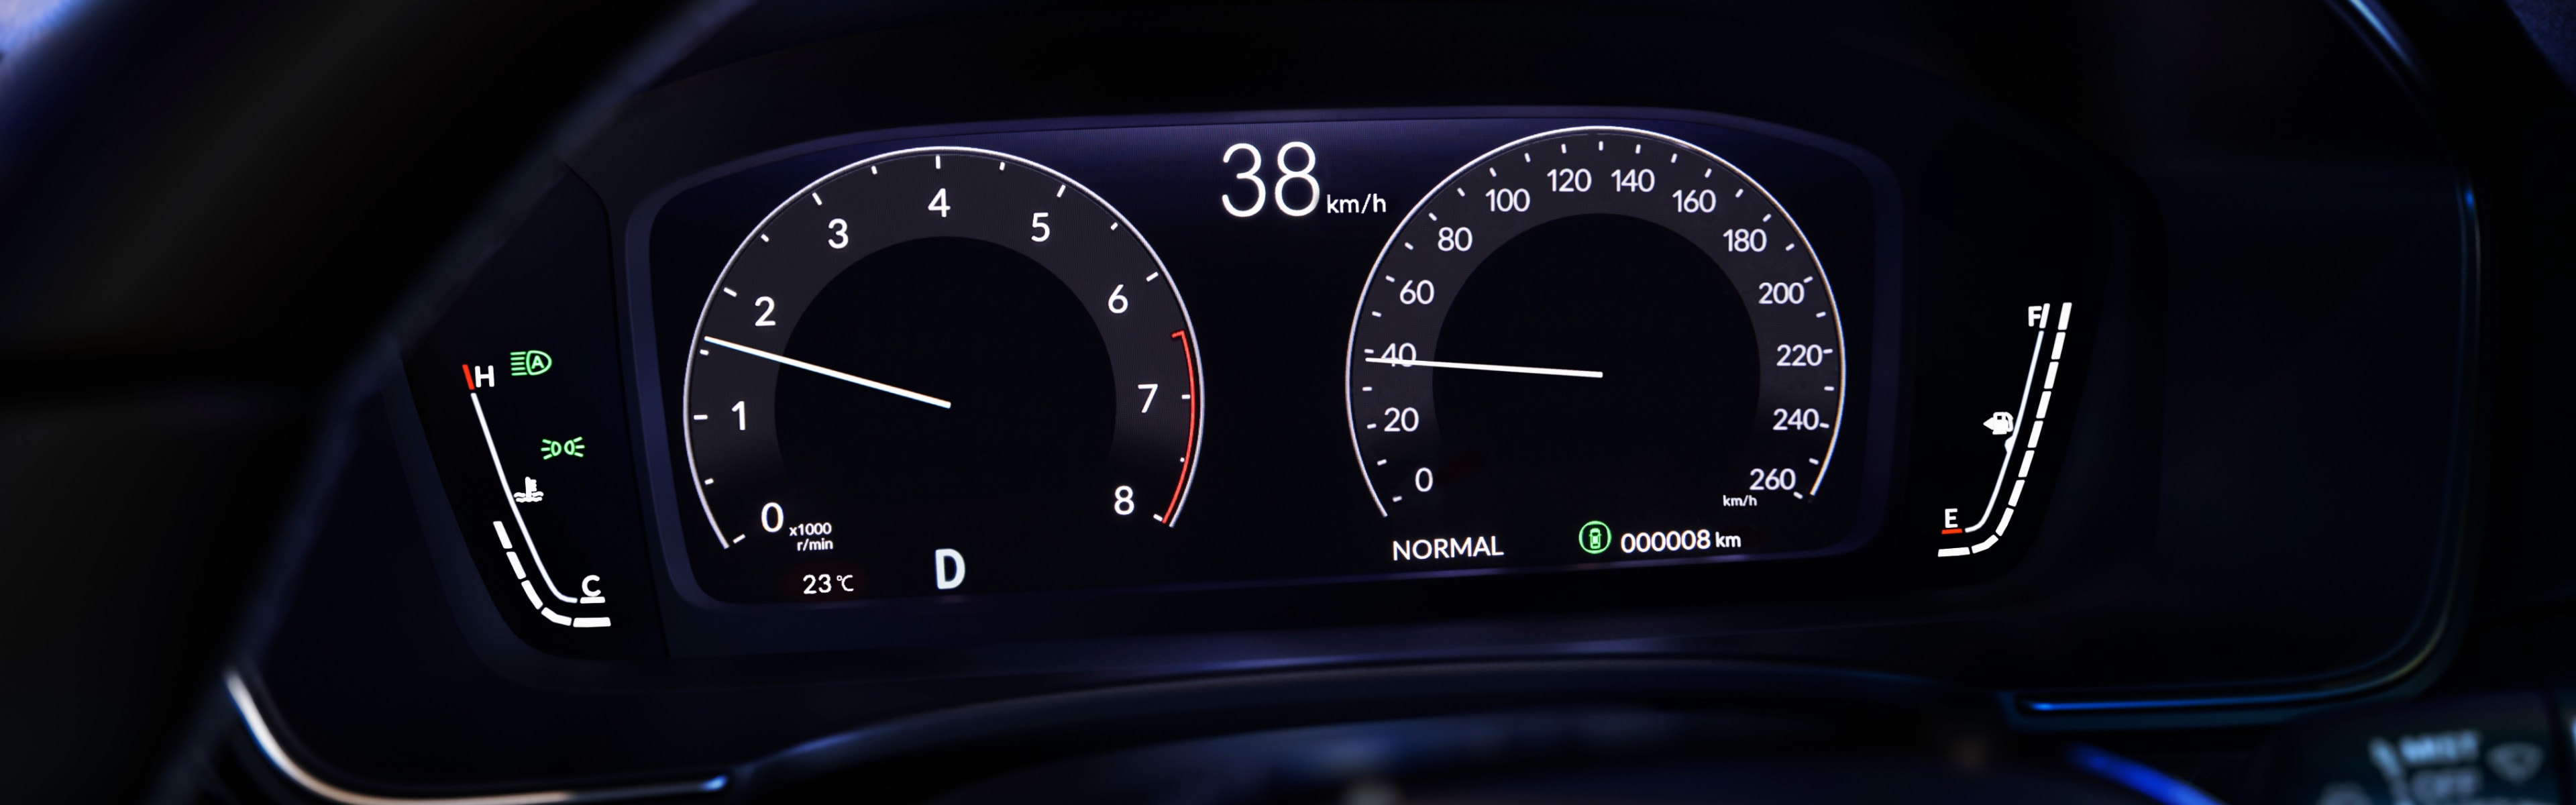 Close-up of Honda Civic Hatchback driver’s digital display through the top gap in the steering wheel.